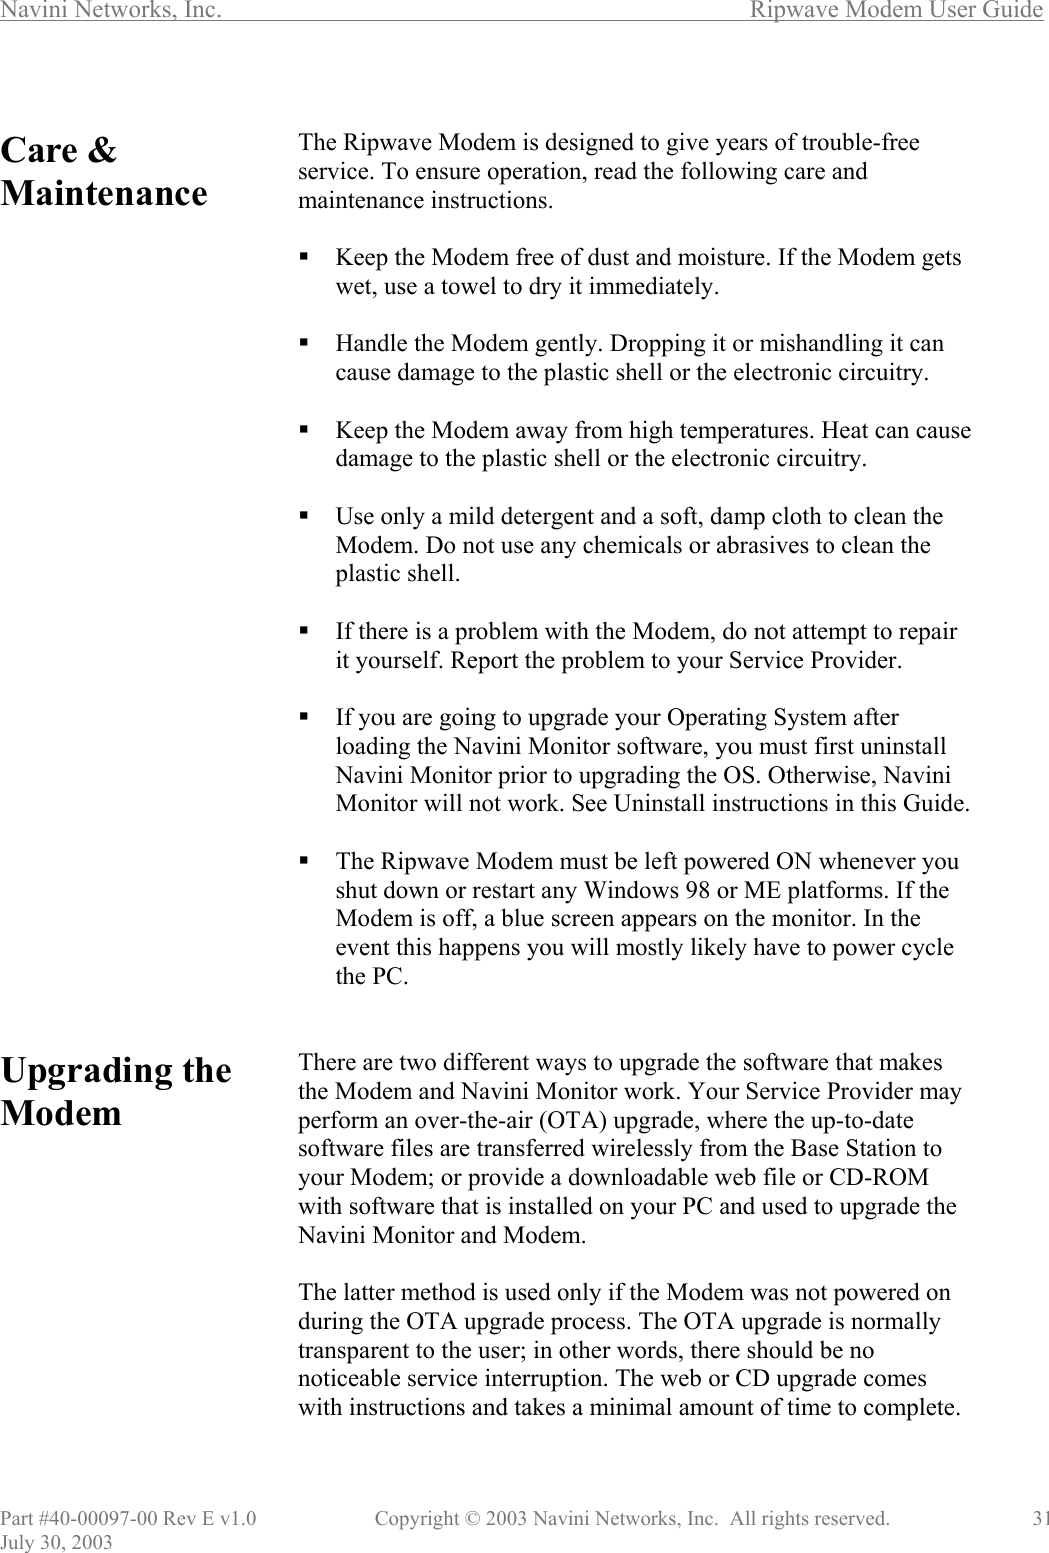 Navini Networks, Inc.        Ripwave Modem User Guide Part #40-00097-00 Rev E v1.0    Copyright © 2003 Navini Networks, Inc.  All rights reserved.               31 July 30, 2003  Care &amp; Maintenance                              Upgrading the Modem            The Ripwave Modem is designed to give years of trouble-free service. To ensure operation, read the following care and maintenance instructions.   Keep the Modem free of dust and moisture. If the Modem gets wet, use a towel to dry it immediately.   Handle the Modem gently. Dropping it or mishandling it can cause damage to the plastic shell or the electronic circuitry.   Keep the Modem away from high temperatures. Heat can cause damage to the plastic shell or the electronic circuitry.   Use only a mild detergent and a soft, damp cloth to clean the Modem. Do not use any chemicals or abrasives to clean the plastic shell.   If there is a problem with the Modem, do not attempt to repair it yourself. Report the problem to your Service Provider.   If you are going to upgrade your Operating System after loading the Navini Monitor software, you must first uninstall Navini Monitor prior to upgrading the OS. Otherwise, Navini Monitor will not work. See Uninstall instructions in this Guide.   The Ripwave Modem must be left powered ON whenever you shut down or restart any Windows 98 or ME platforms. If the Modem is off, a blue screen appears on the monitor. In the event this happens you will mostly likely have to power cycle the PC.   There are two different ways to upgrade the software that makes the Modem and Navini Monitor work. Your Service Provider may perform an over-the-air (OTA) upgrade, where the up-to-date software files are transferred wirelessly from the Base Station to your Modem; or provide a downloadable web file or CD-ROM with software that is installed on your PC and used to upgrade the Navini Monitor and Modem.   The latter method is used only if the Modem was not powered on during the OTA upgrade process. The OTA upgrade is normally transparent to the user; in other words, there should be no noticeable service interruption. The web or CD upgrade comes with instructions and takes a minimal amount of time to complete.